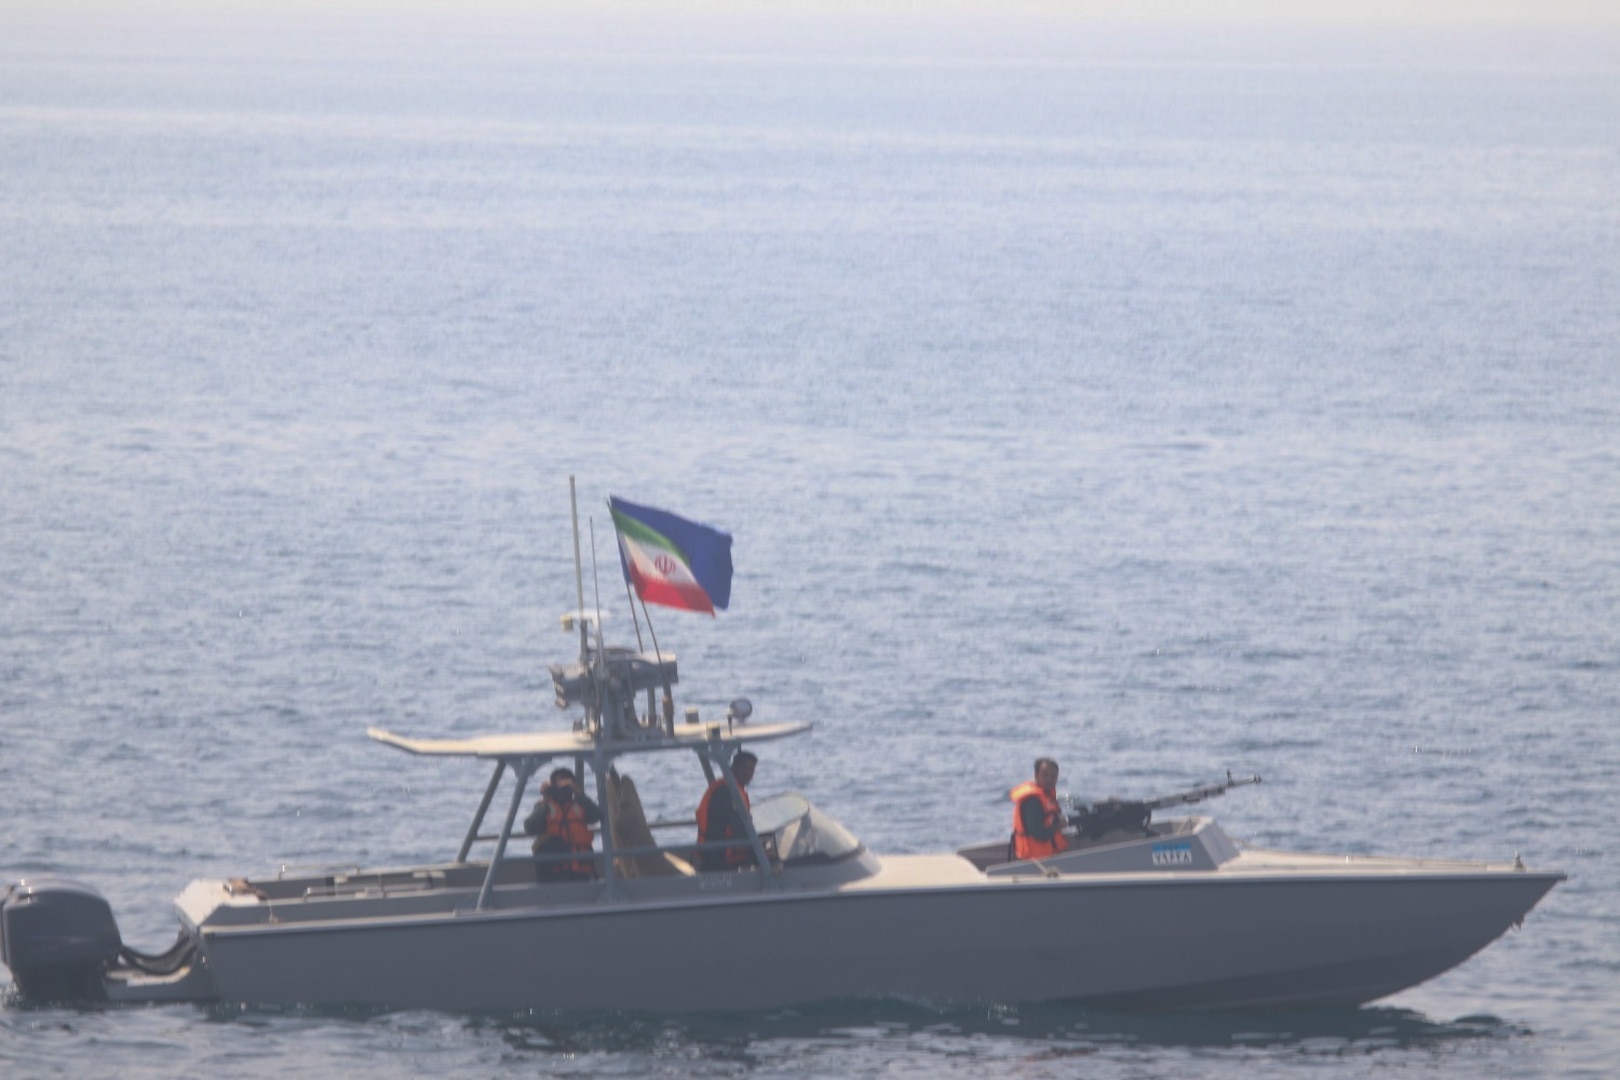 220620-N-NO146-1004 STRAIT OF HORMUZ (June 20, 2022) Iran’s Islamic Revolutionary Guard Corps Navy (IRGCN) operating in an unsafe and unprofessional manner in close proximity to patrol coastal ship USS Sirocco (PC 6) and expeditionary fast transport USNS Choctaw County (T-EPF 2) in the Strait of Hormuz, June 20.